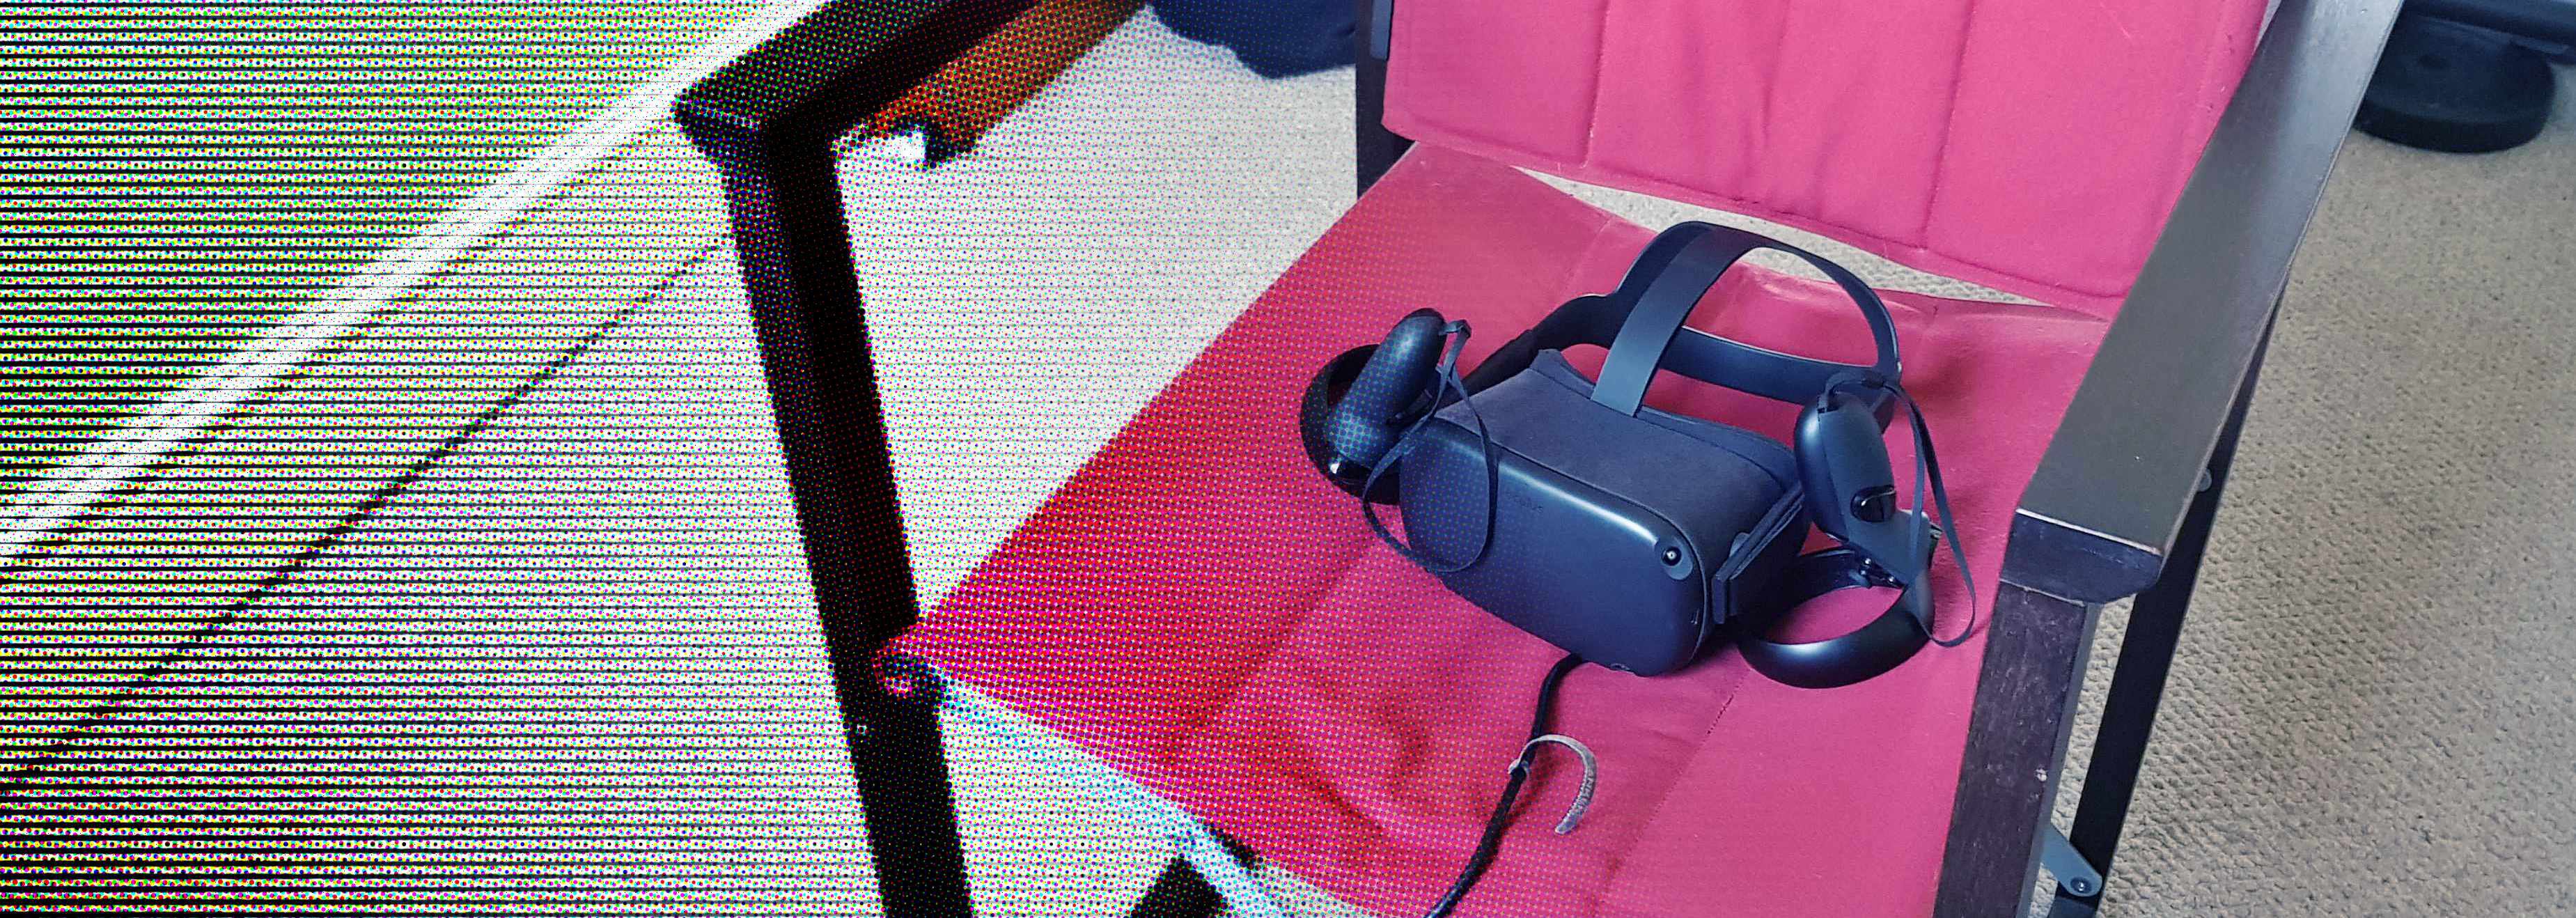 A VR headset resting on a pink chair